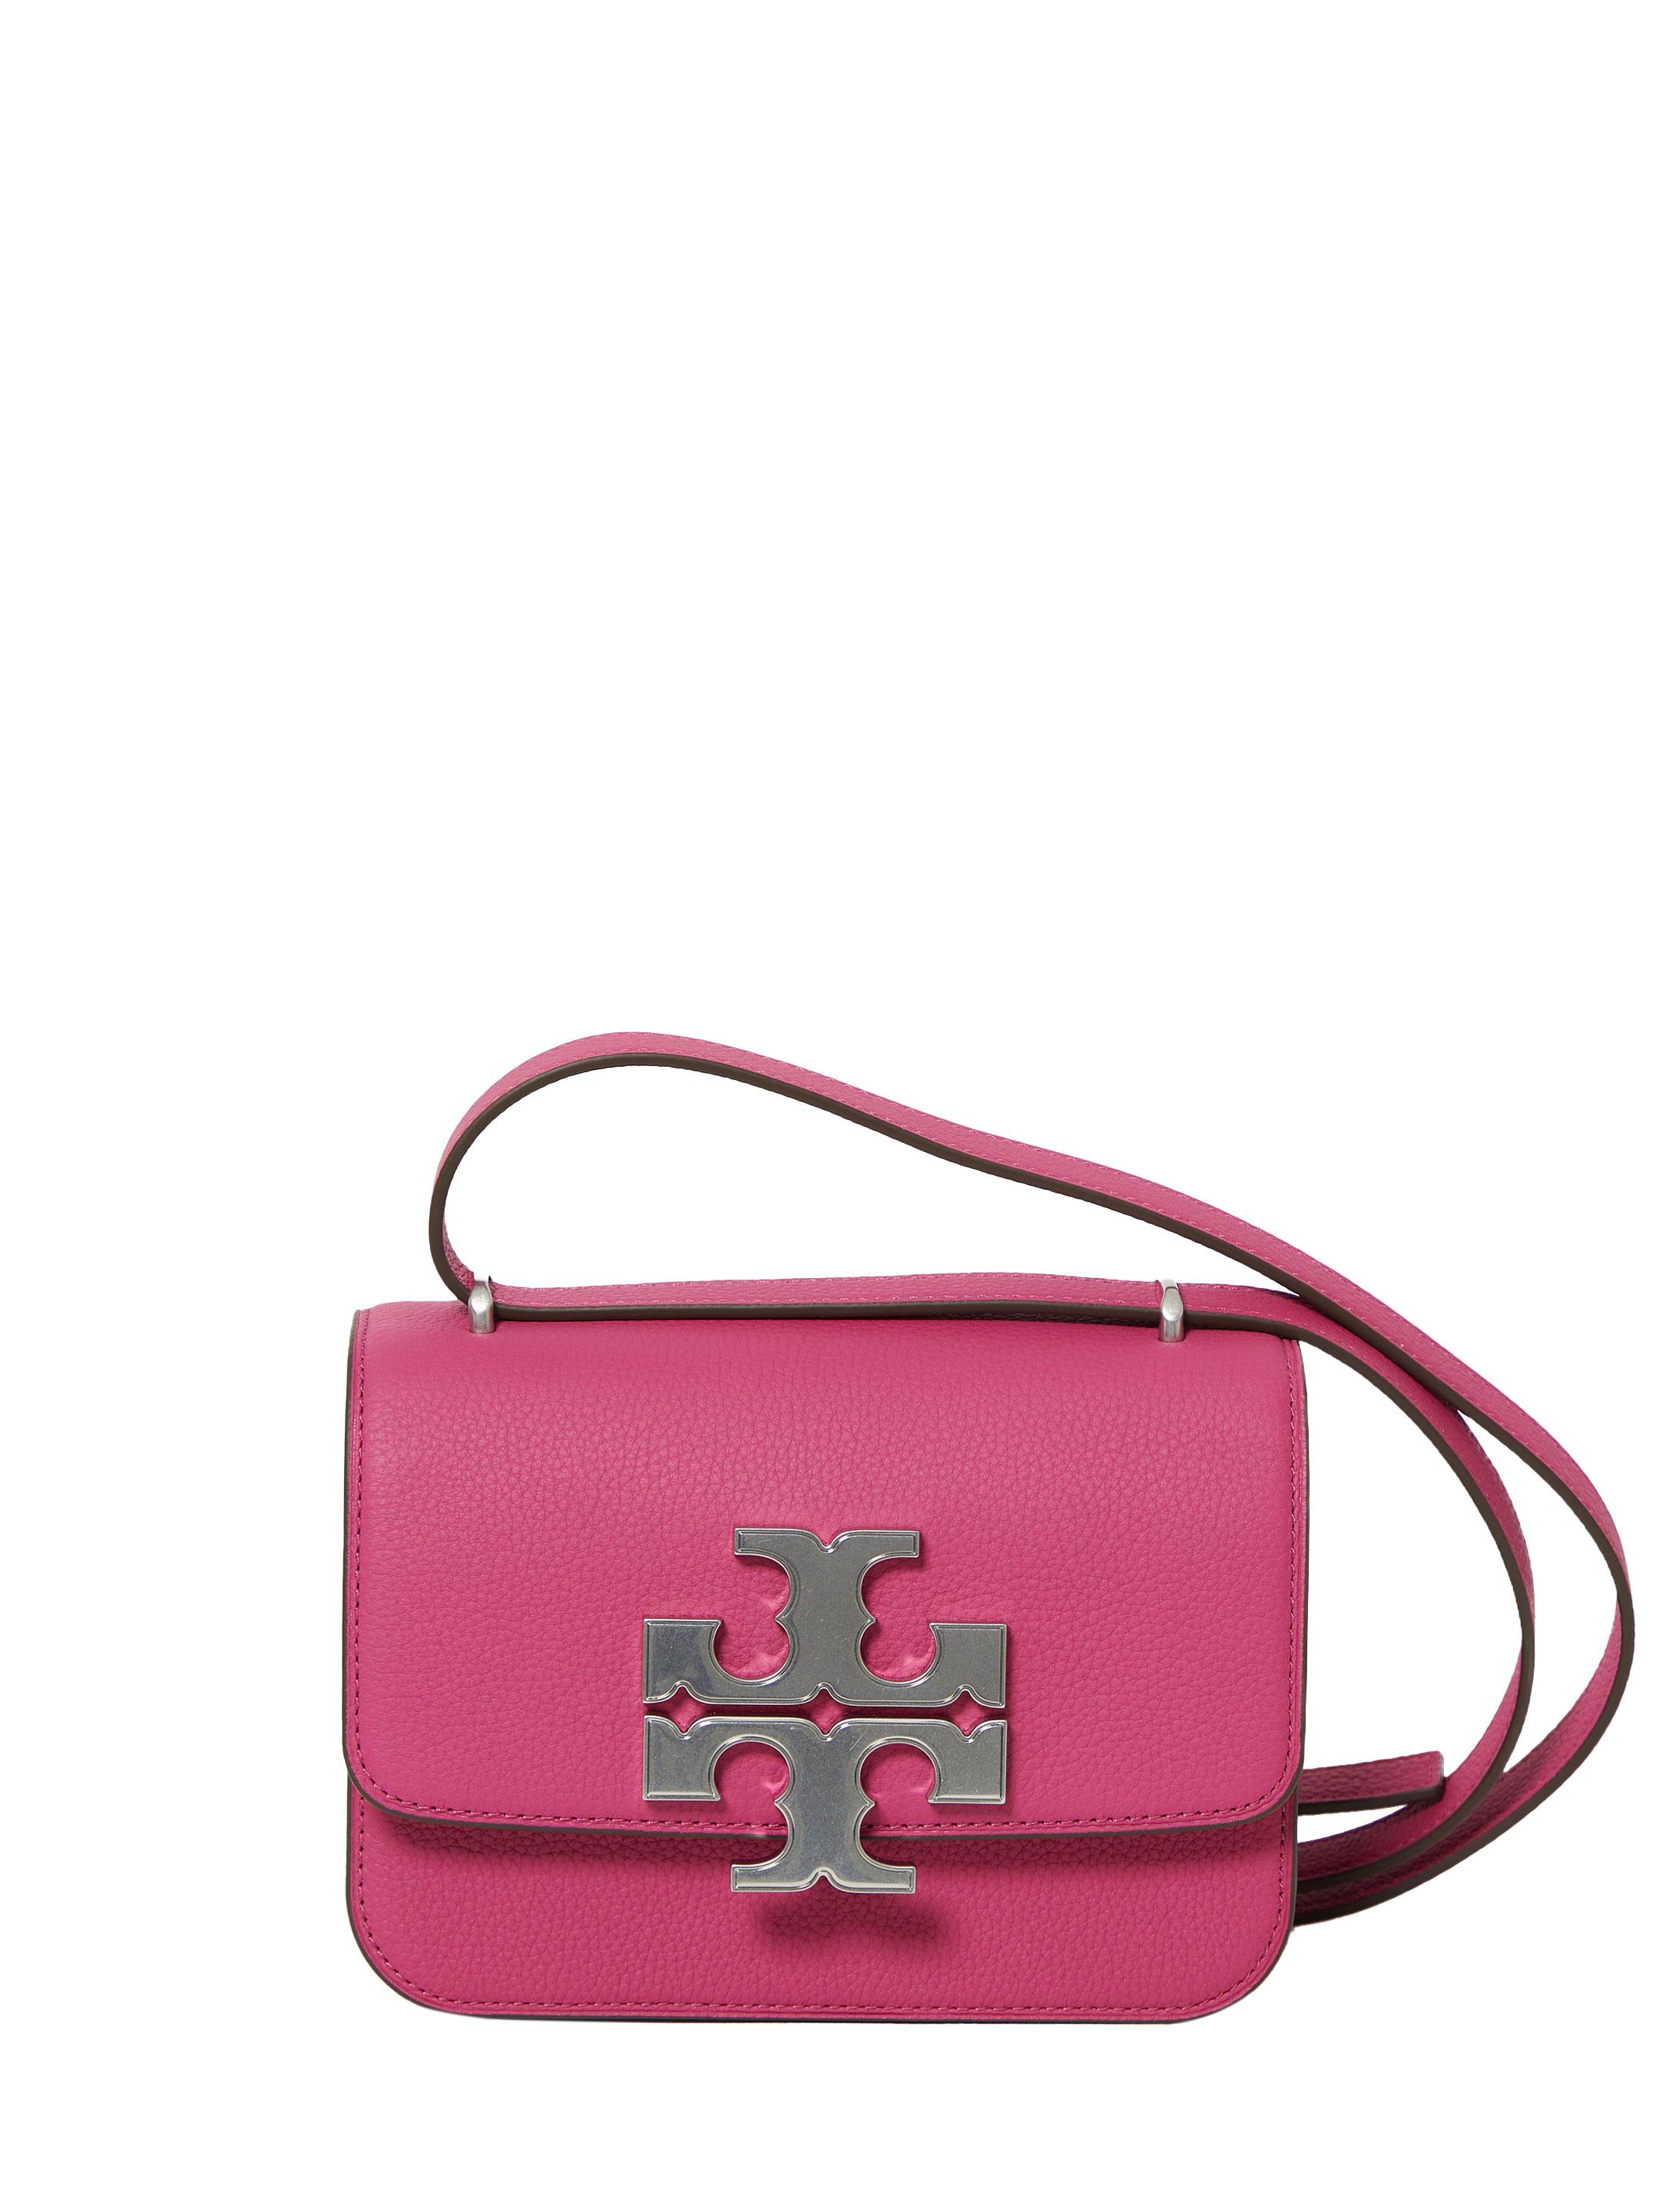 Tory Burch Small Eleanor Pebbled Convertible Bag in Pink | Lyst